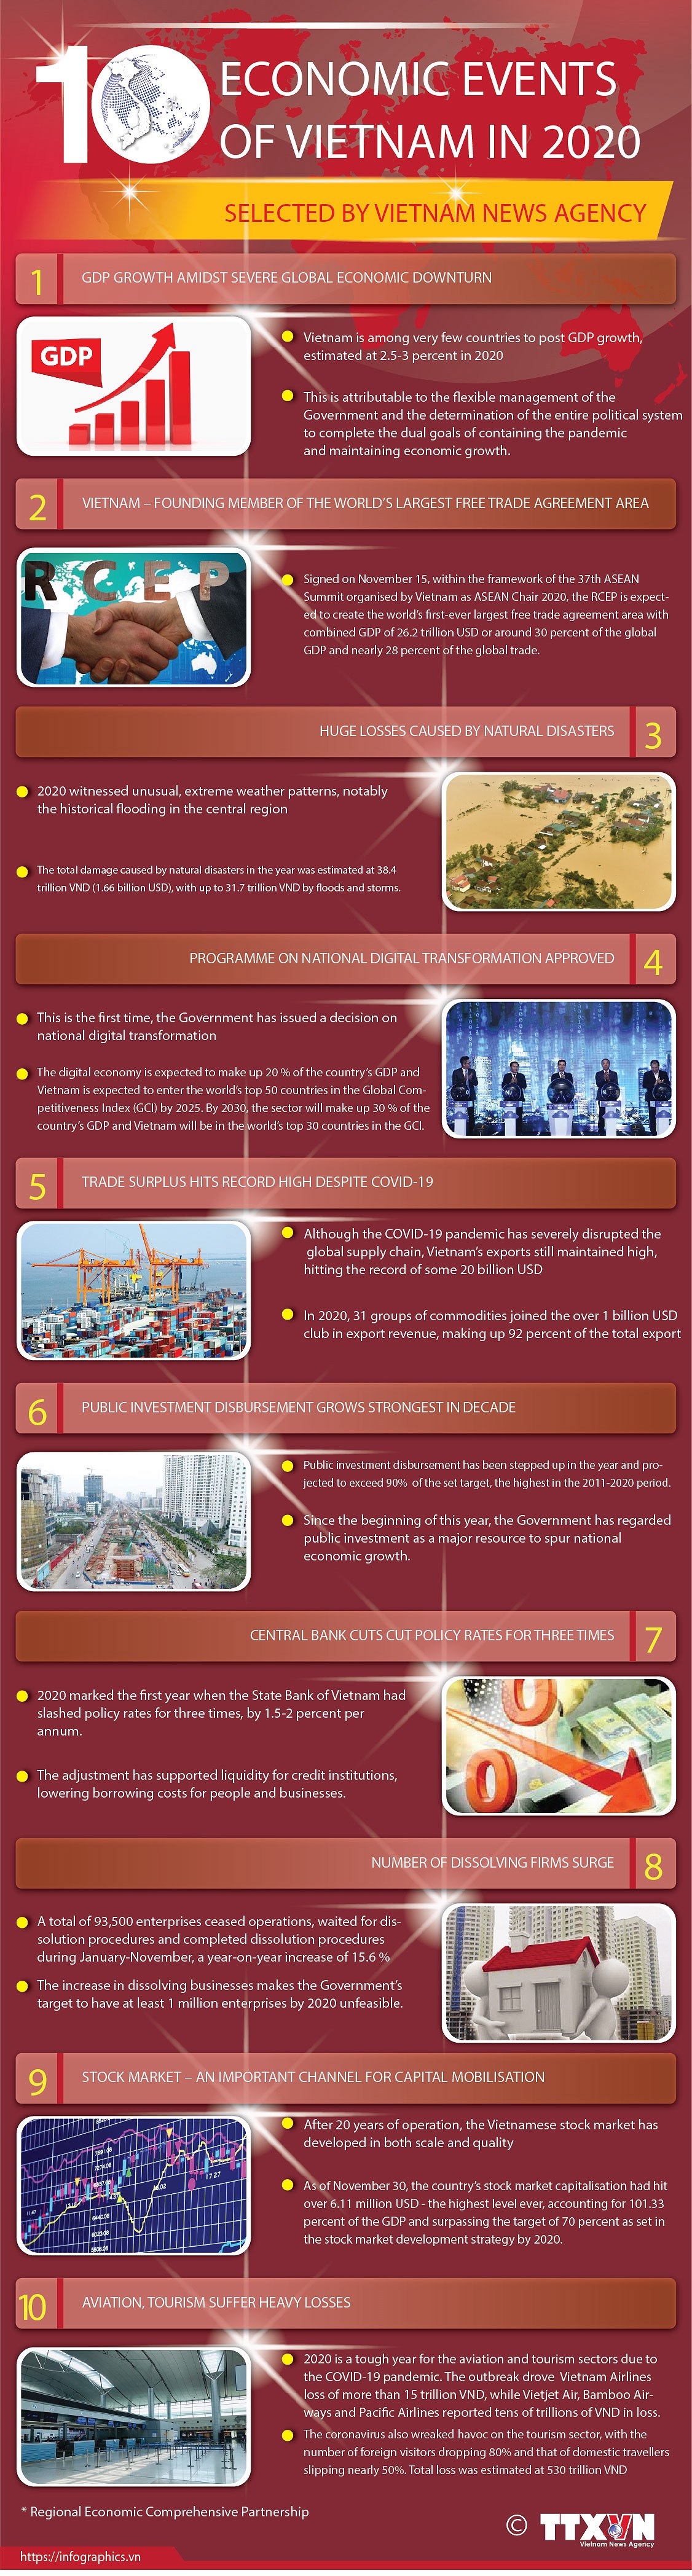 Top 10 economic events of Vietnam in 2020 hinh anh 1